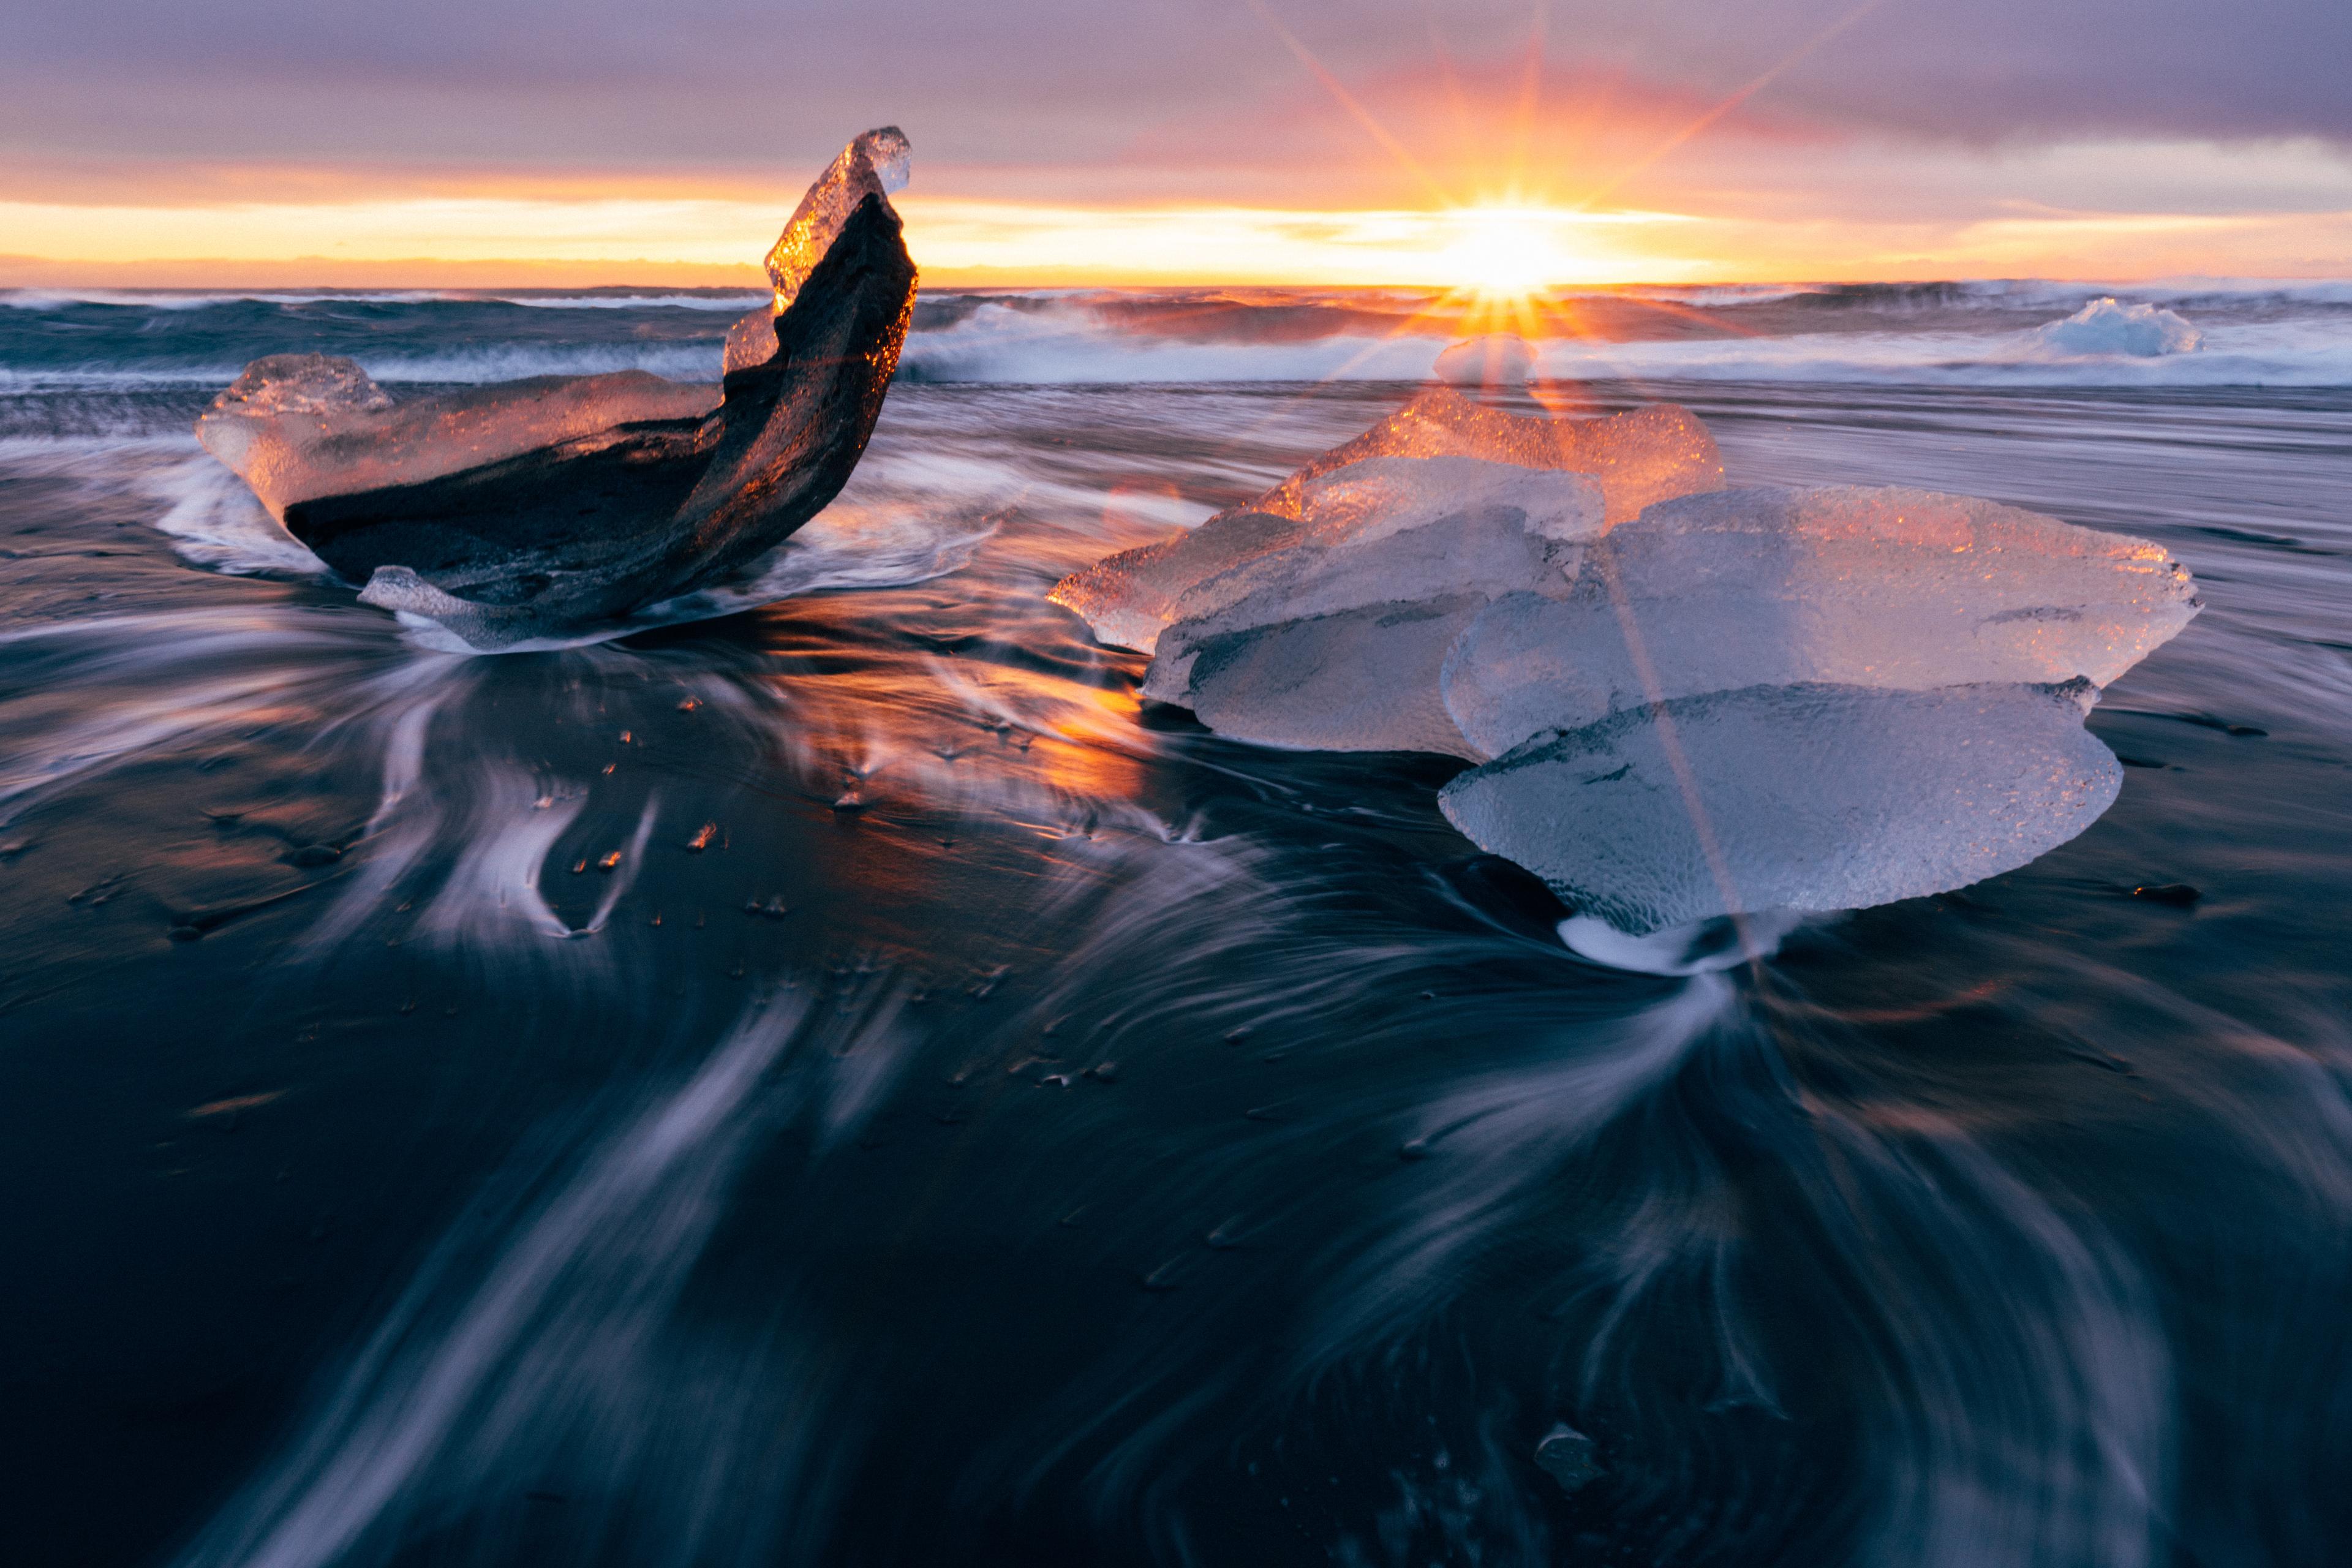 Diamond Beach with chunks of ice on the shore as sea waves crash into them, creating dramatic splashes.